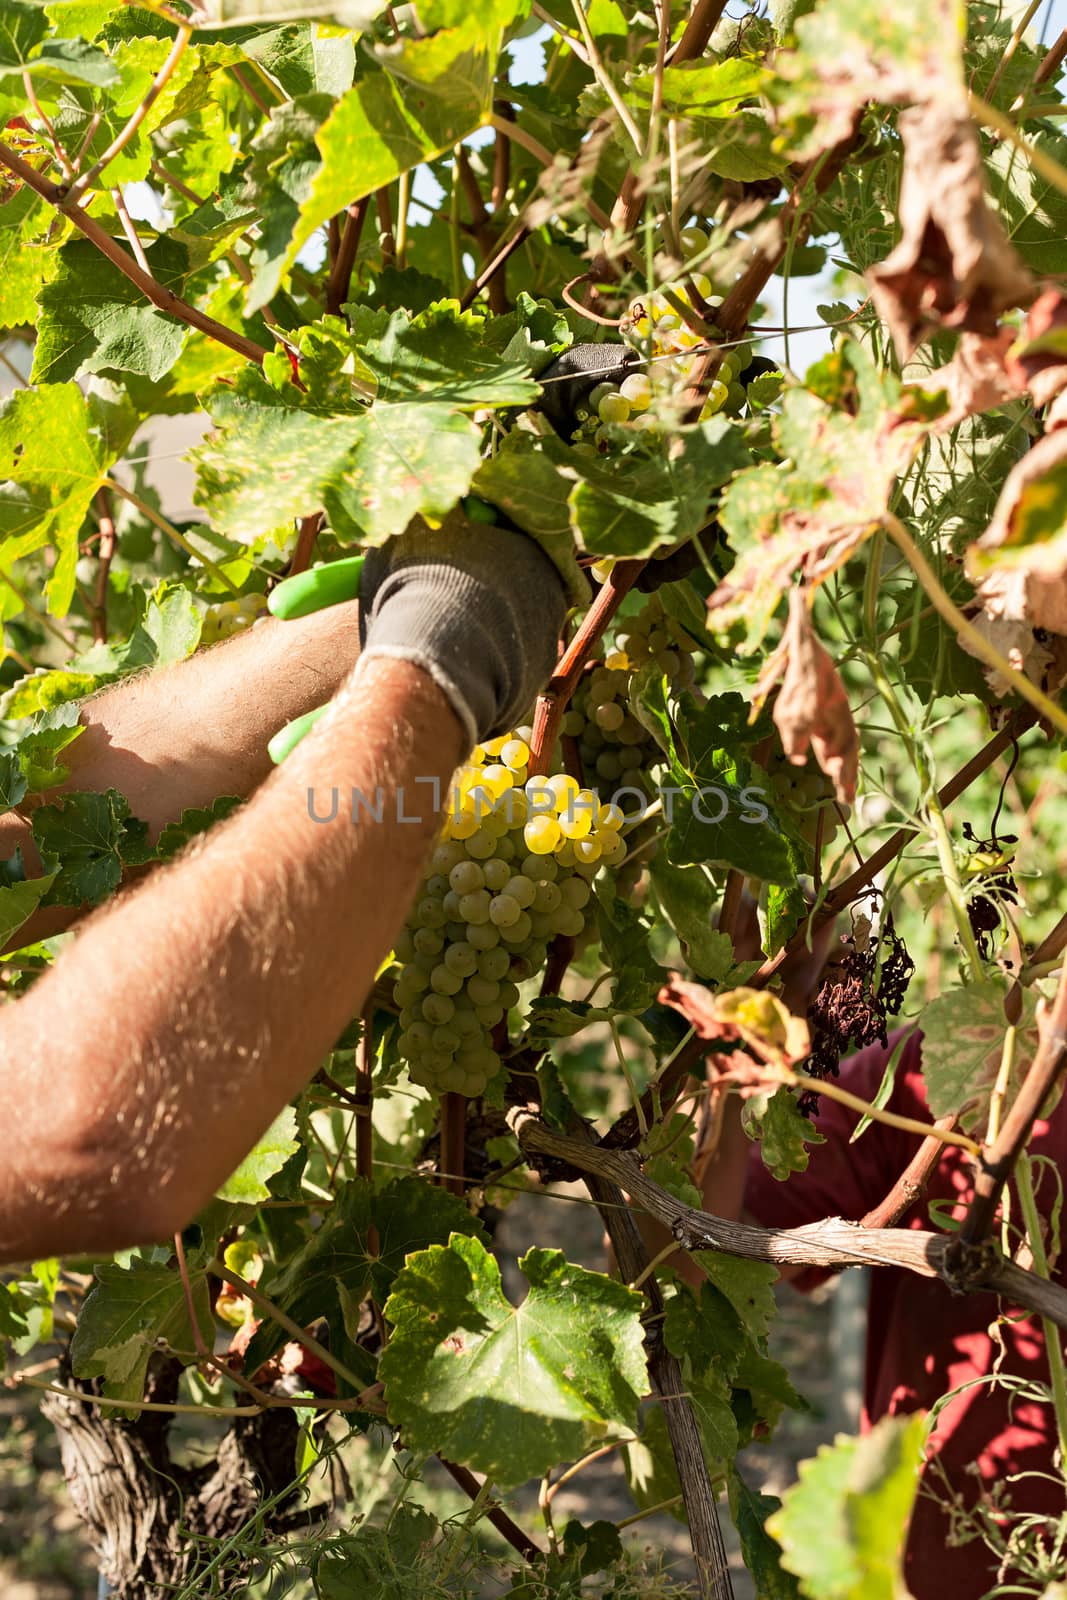 Grape harvester by cutting a bunch of grapes from the vine in a sunny day